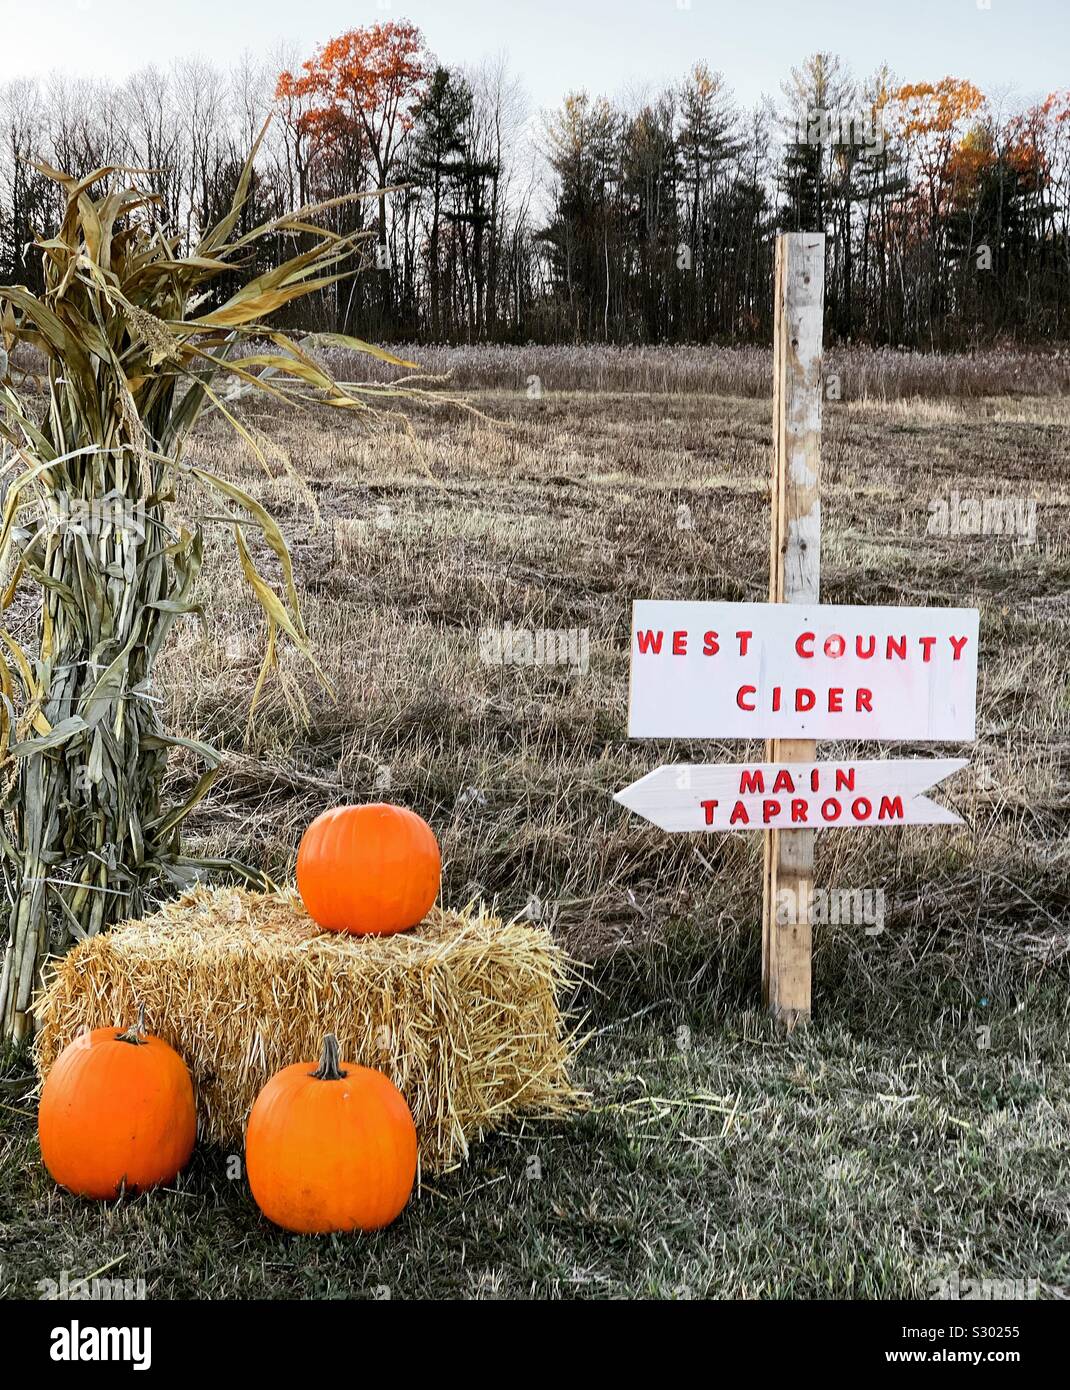 Signs for West County Cider’s Main Taproom beside three pumpkins, field in background. Shelburne, Massachusetts, United States Stock Photo